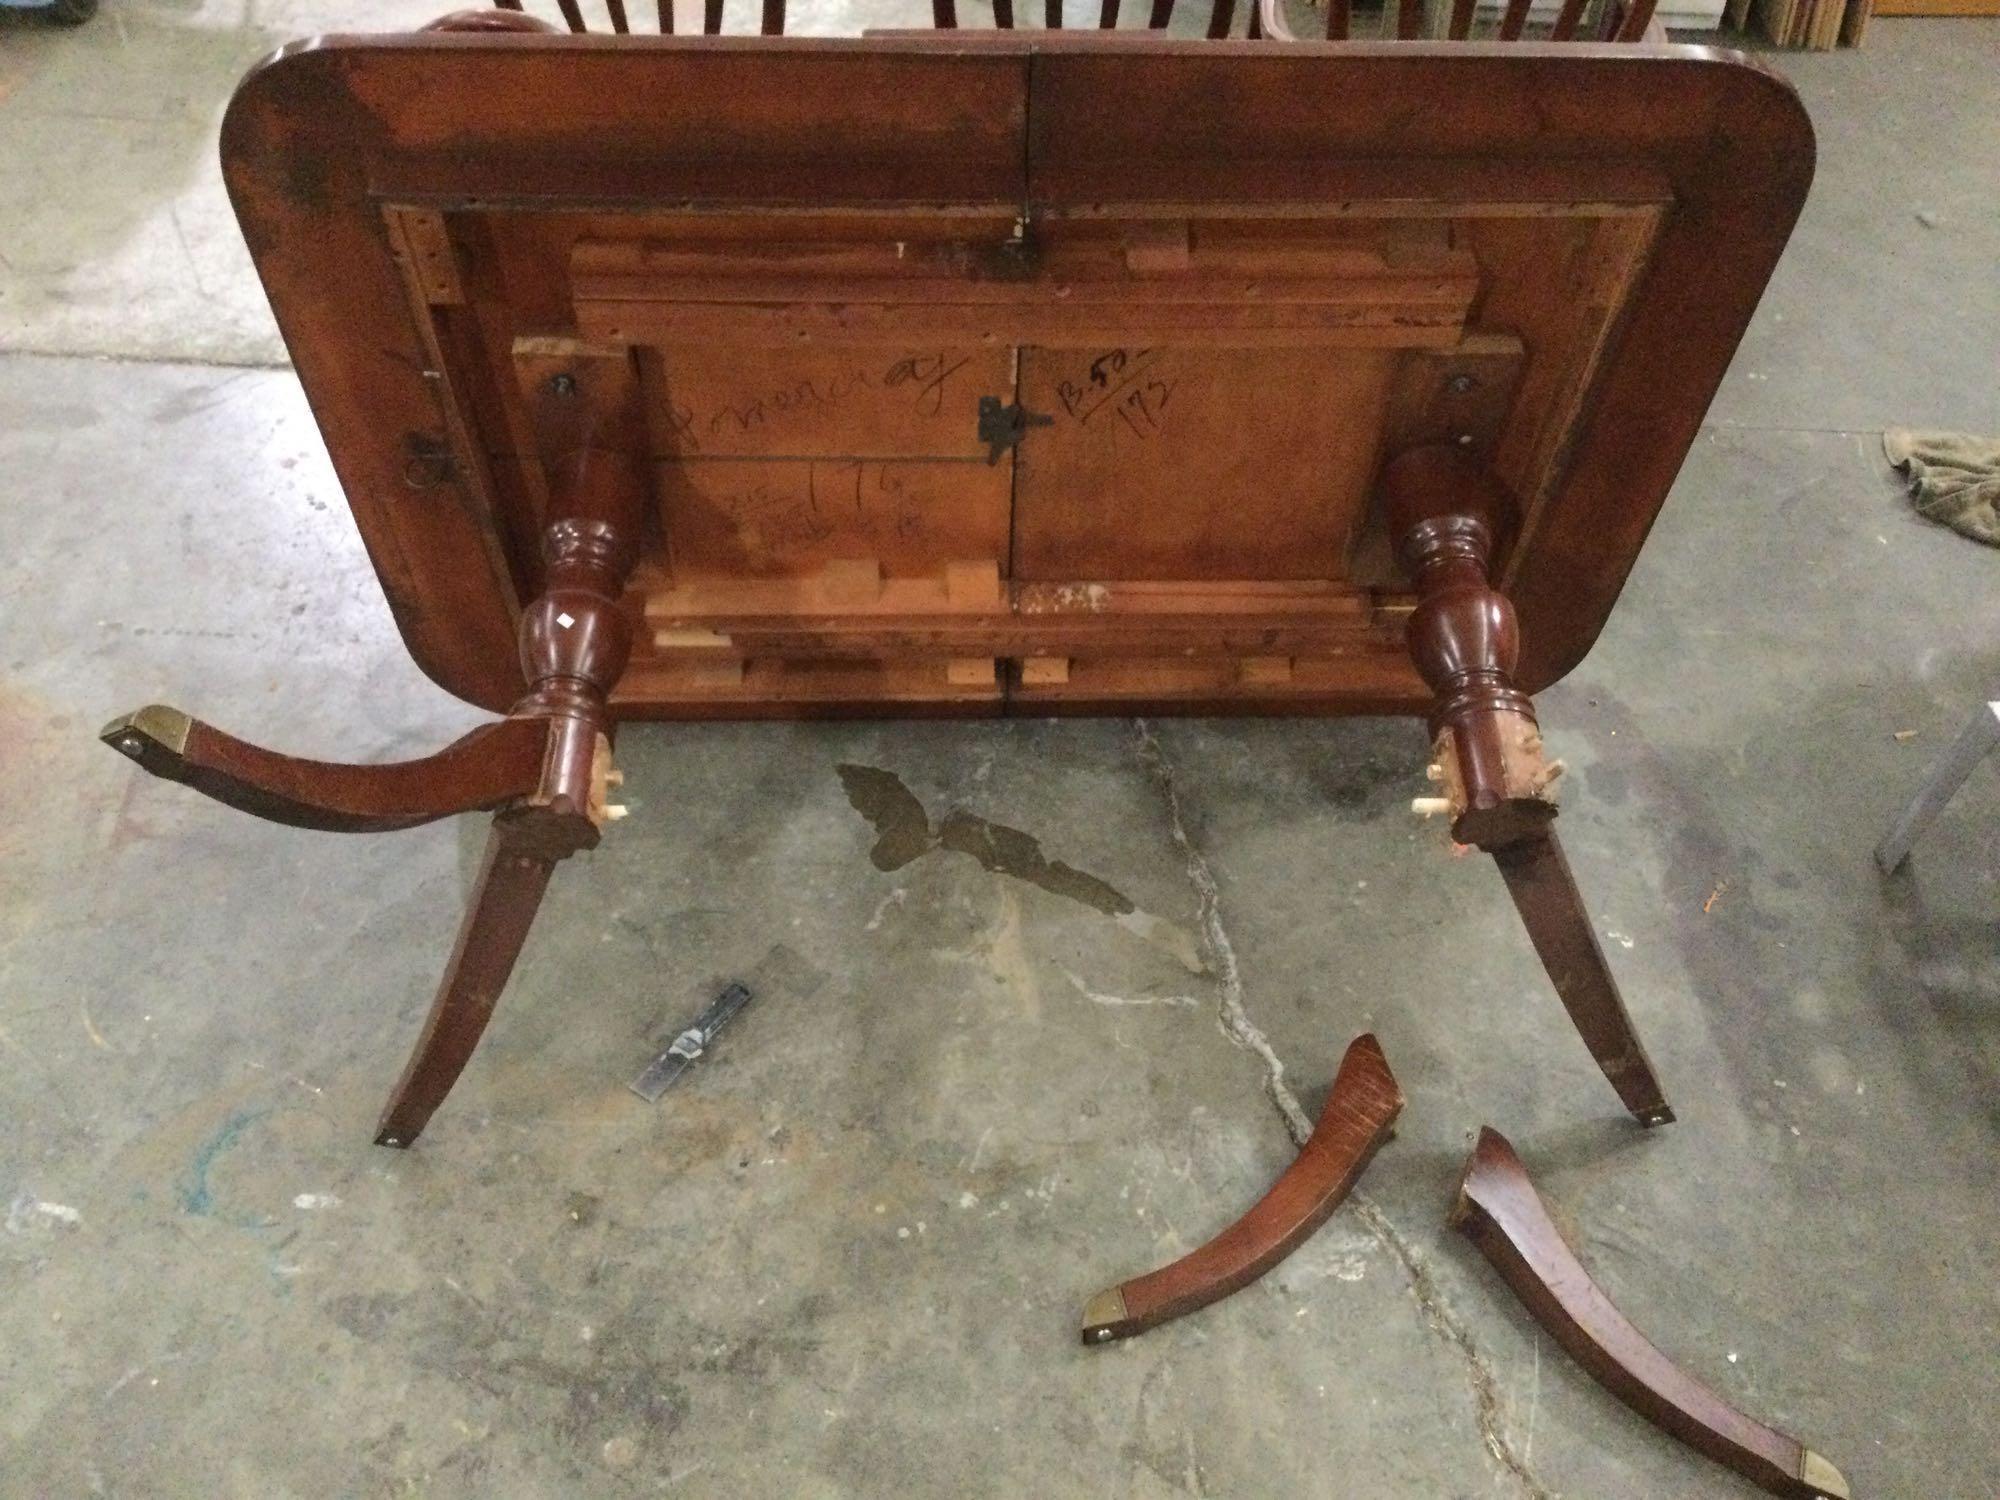 Vintage dining room set: cherry wood table w/ 1 leaf (needs legs glued), 6 chairs, sold as is.